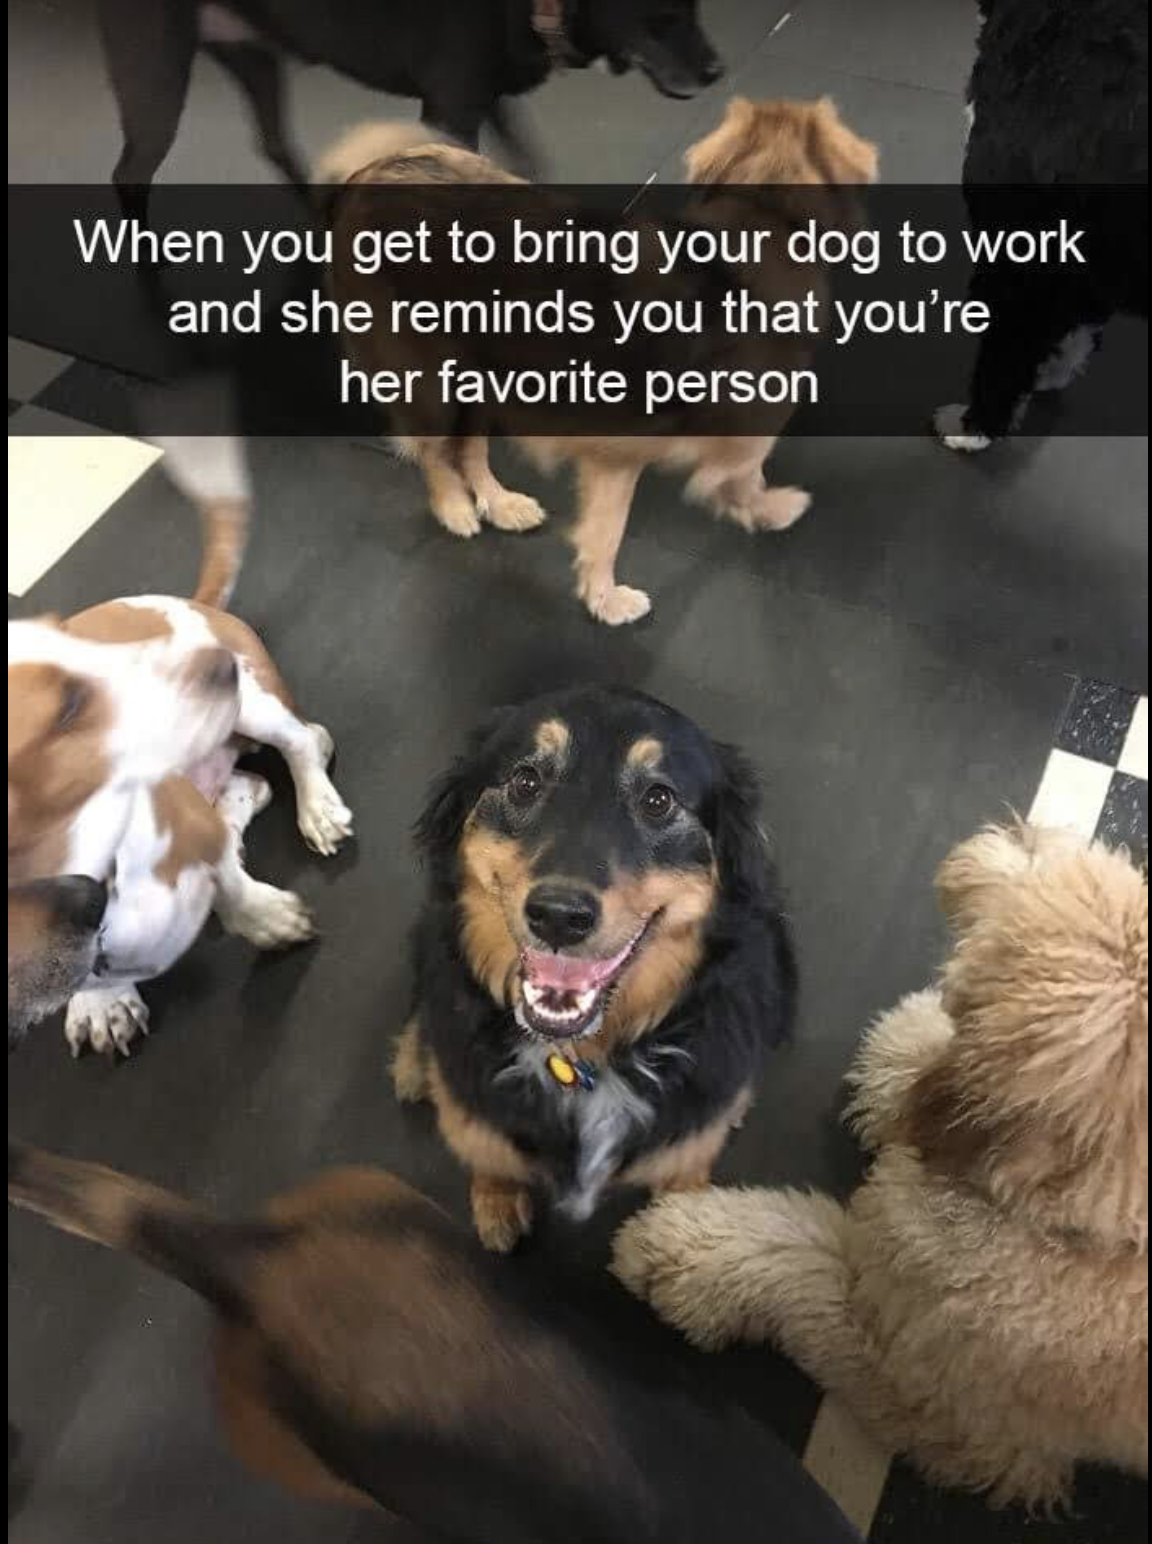 good things about dogs - When you get to bring your dog to work and she reminds you that you're her favorite person